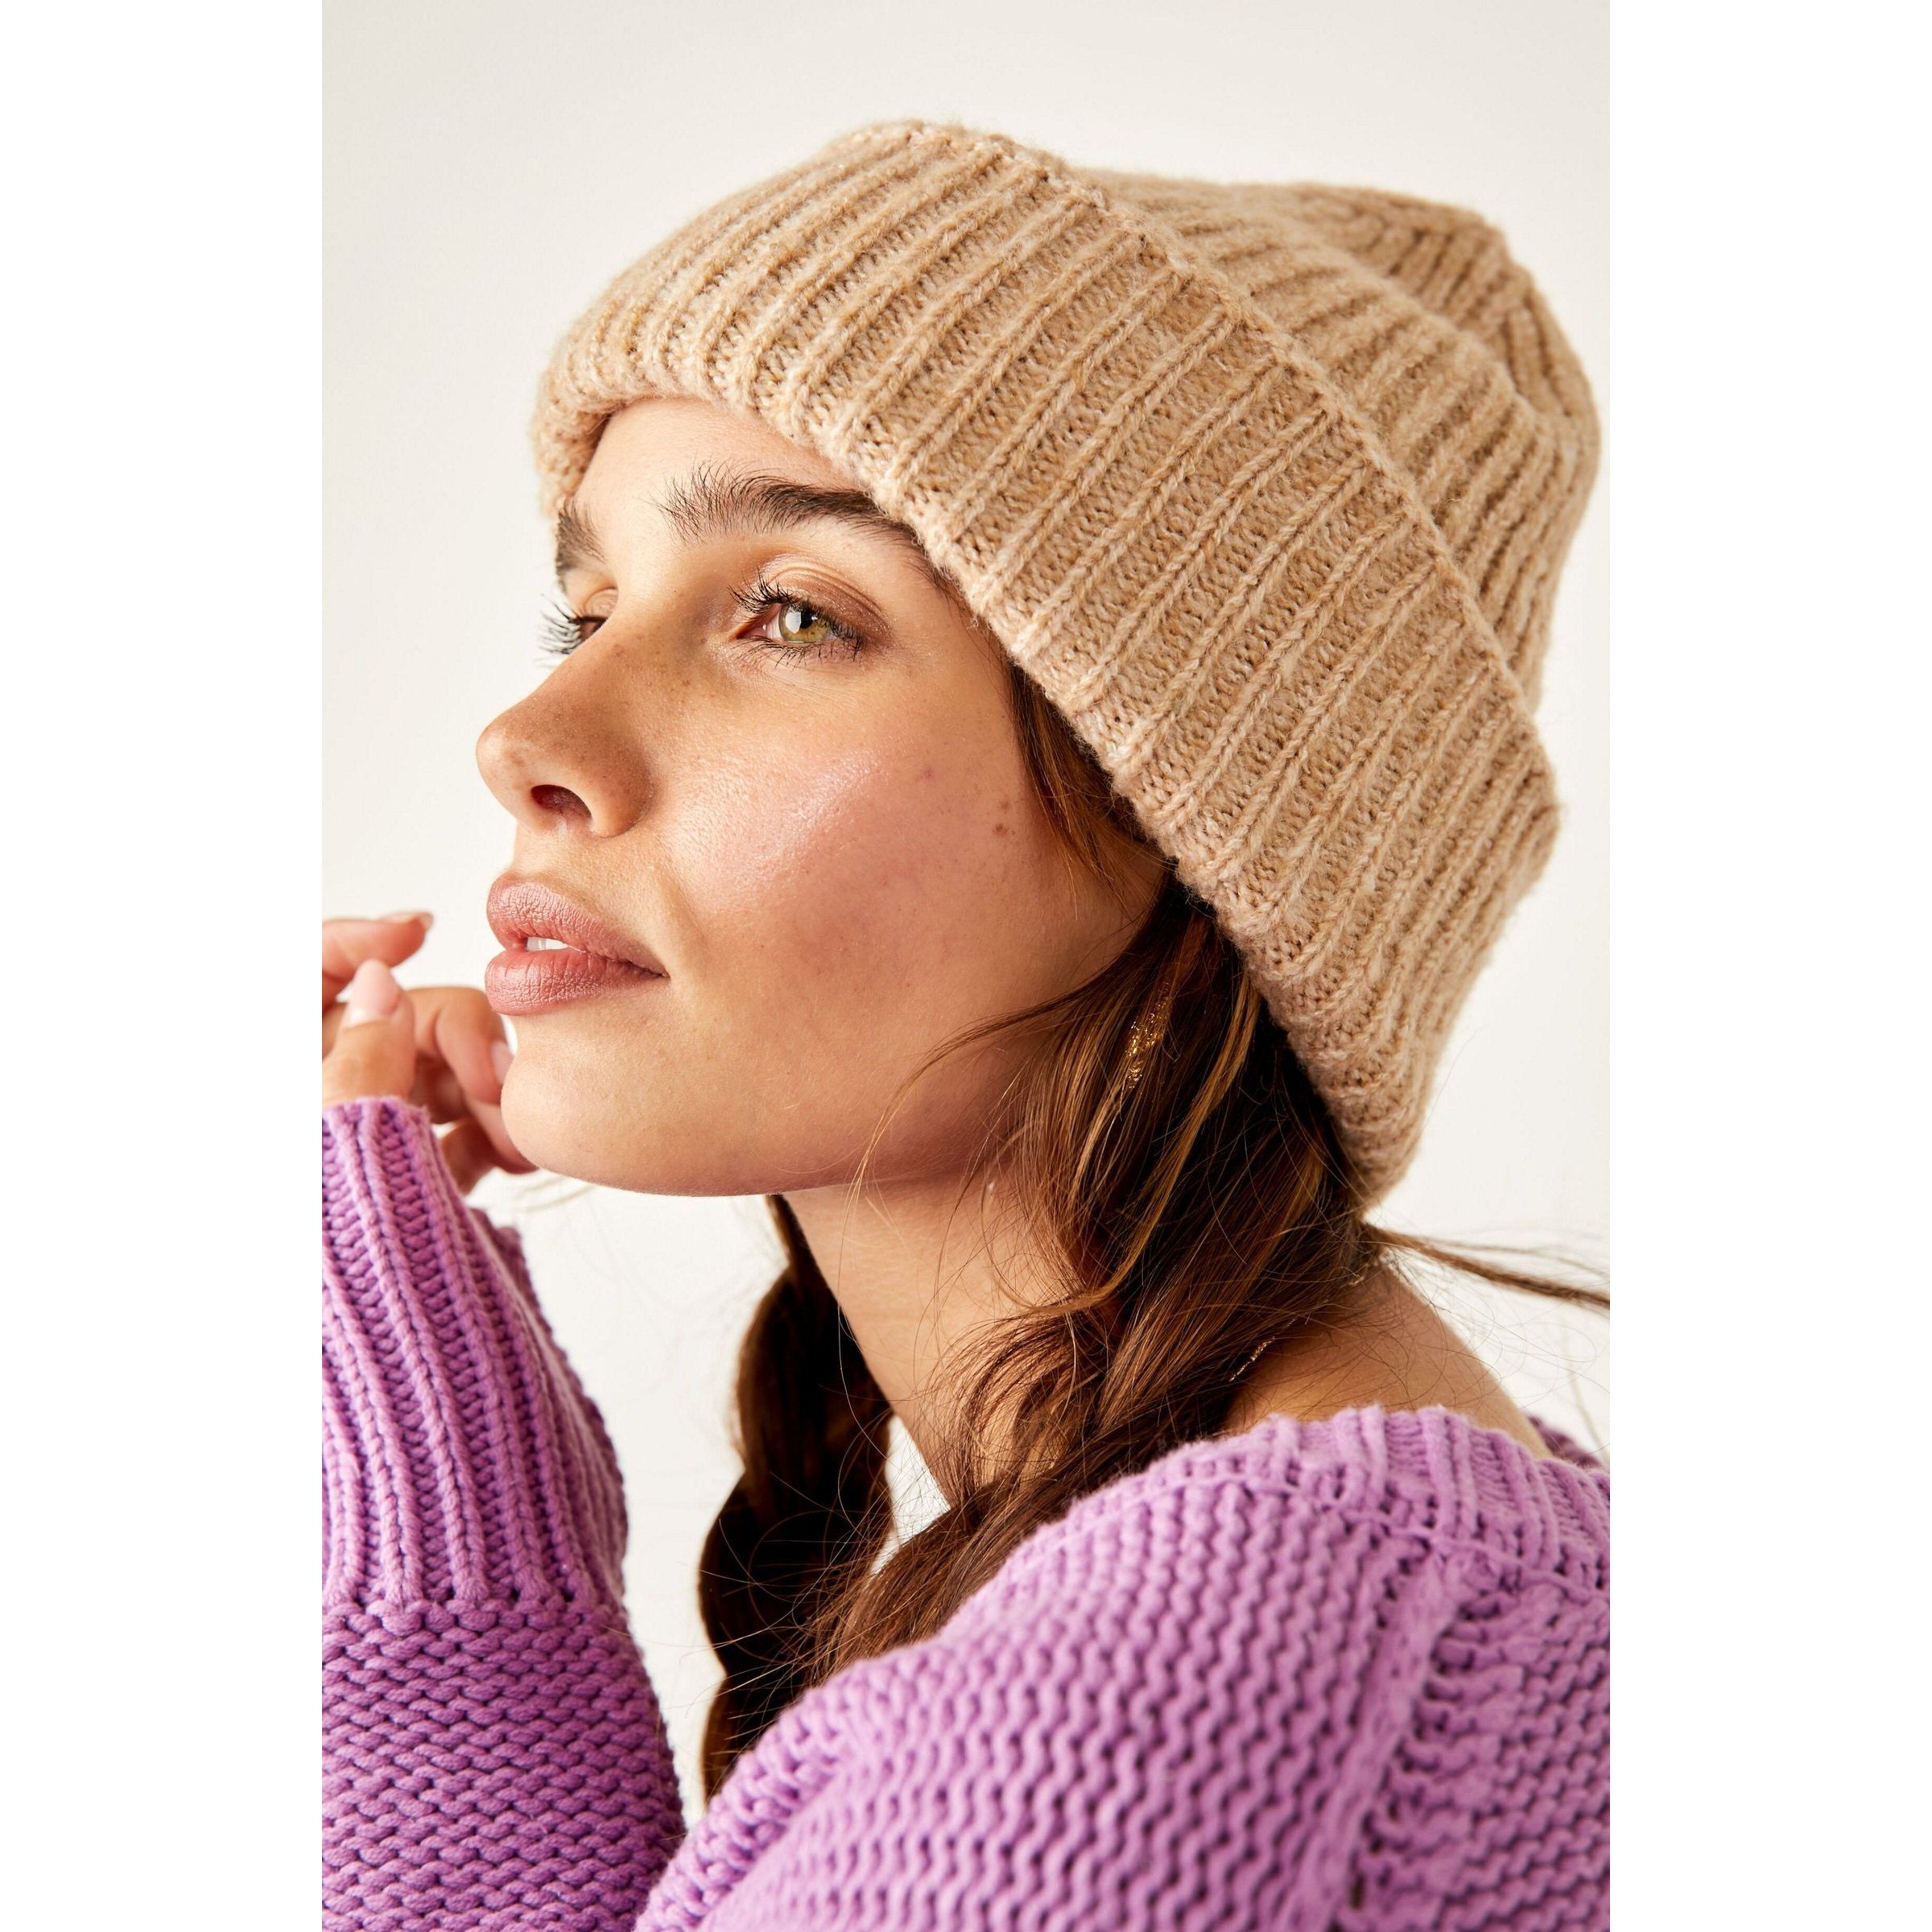 Free People - Harbor Marled Ribbed Beanie in Camel